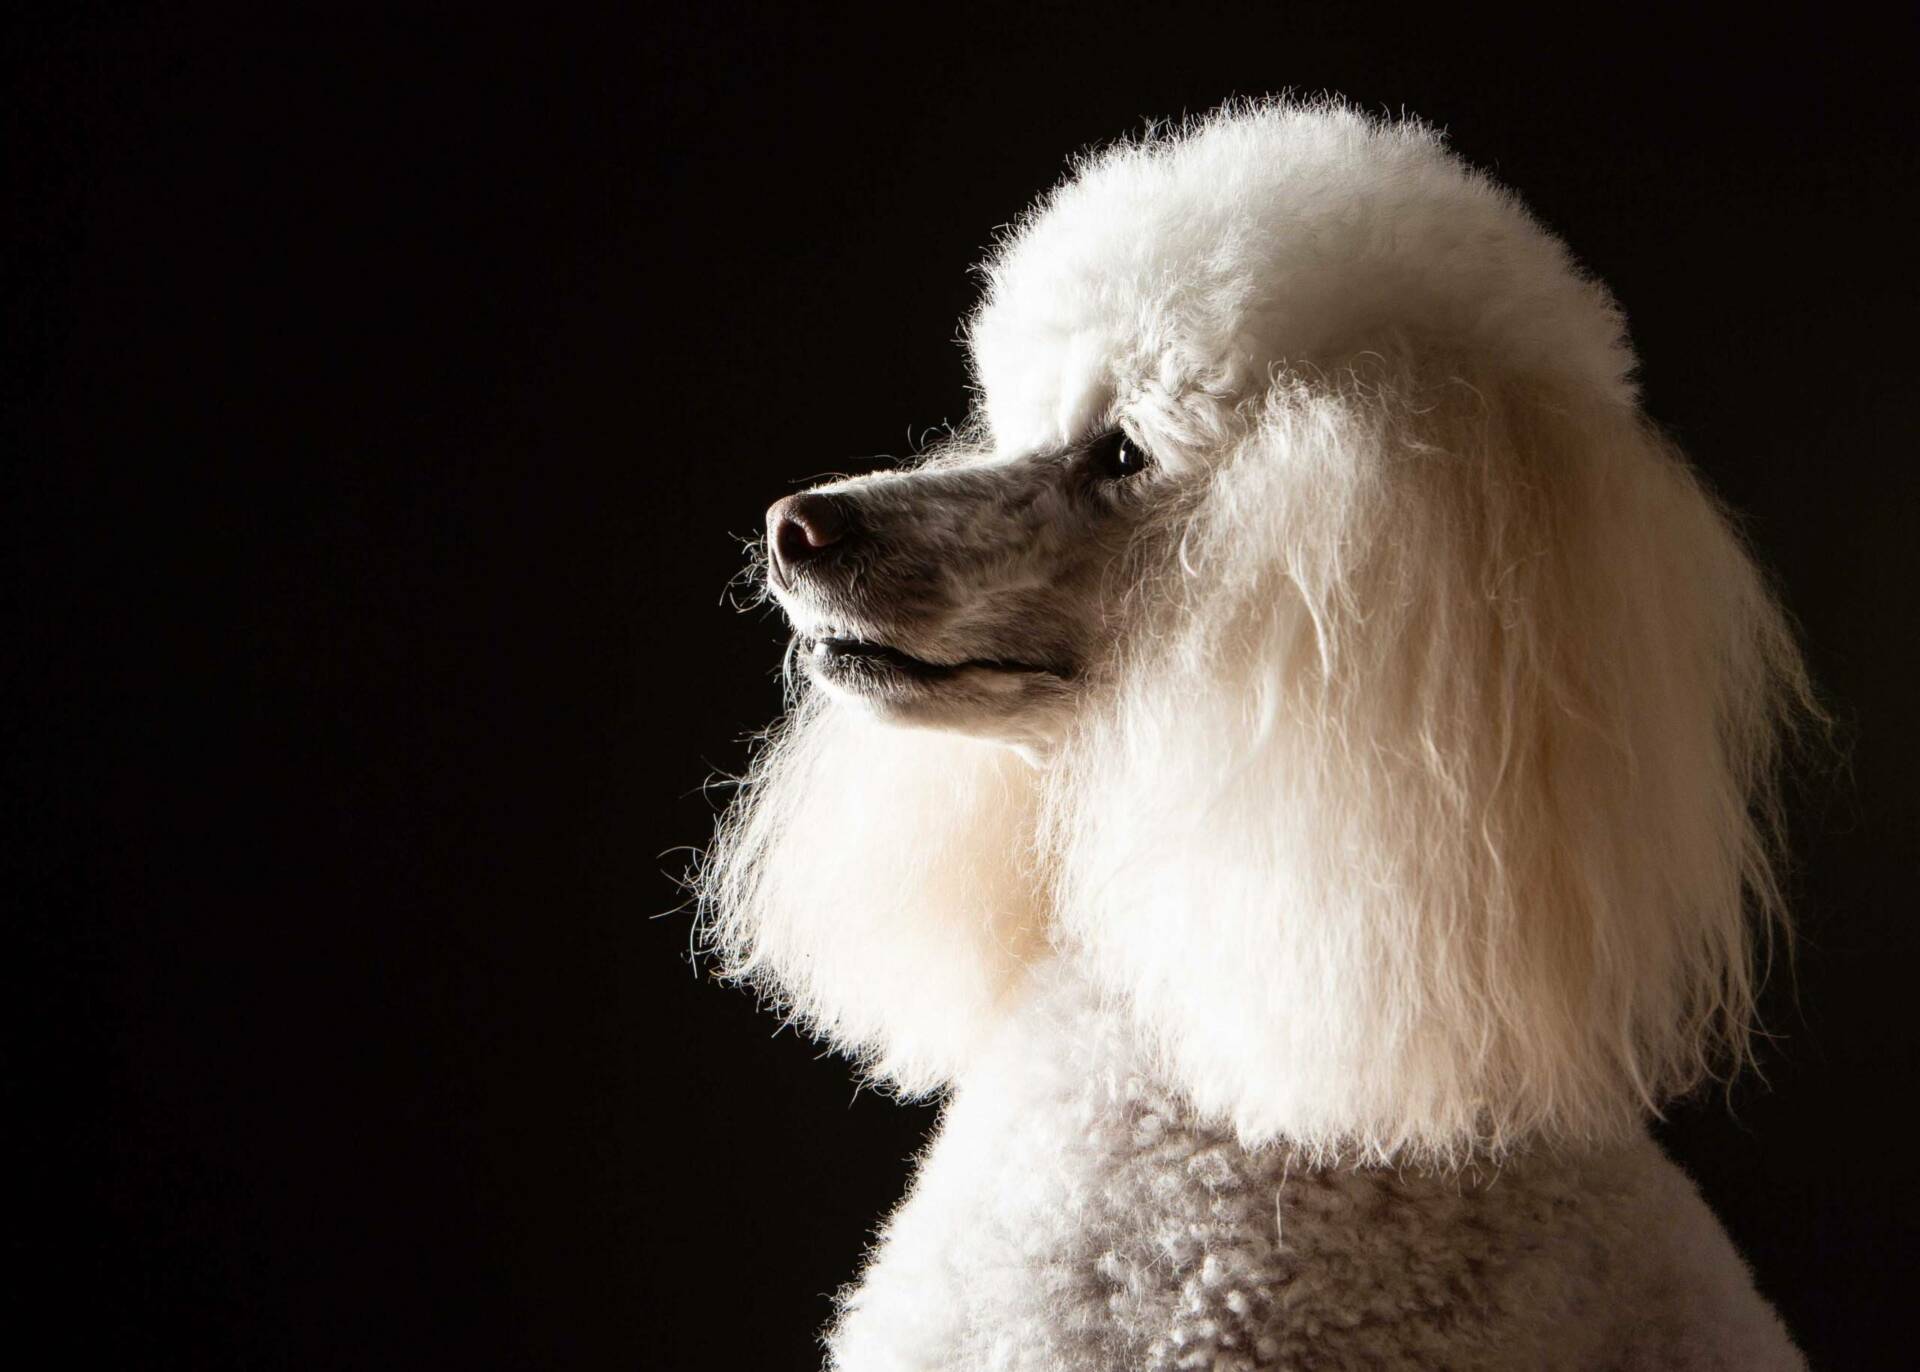 Poodle on a black background by Mark Hewitson of Mark Hewitson Photography, Thame, Oxfordshire